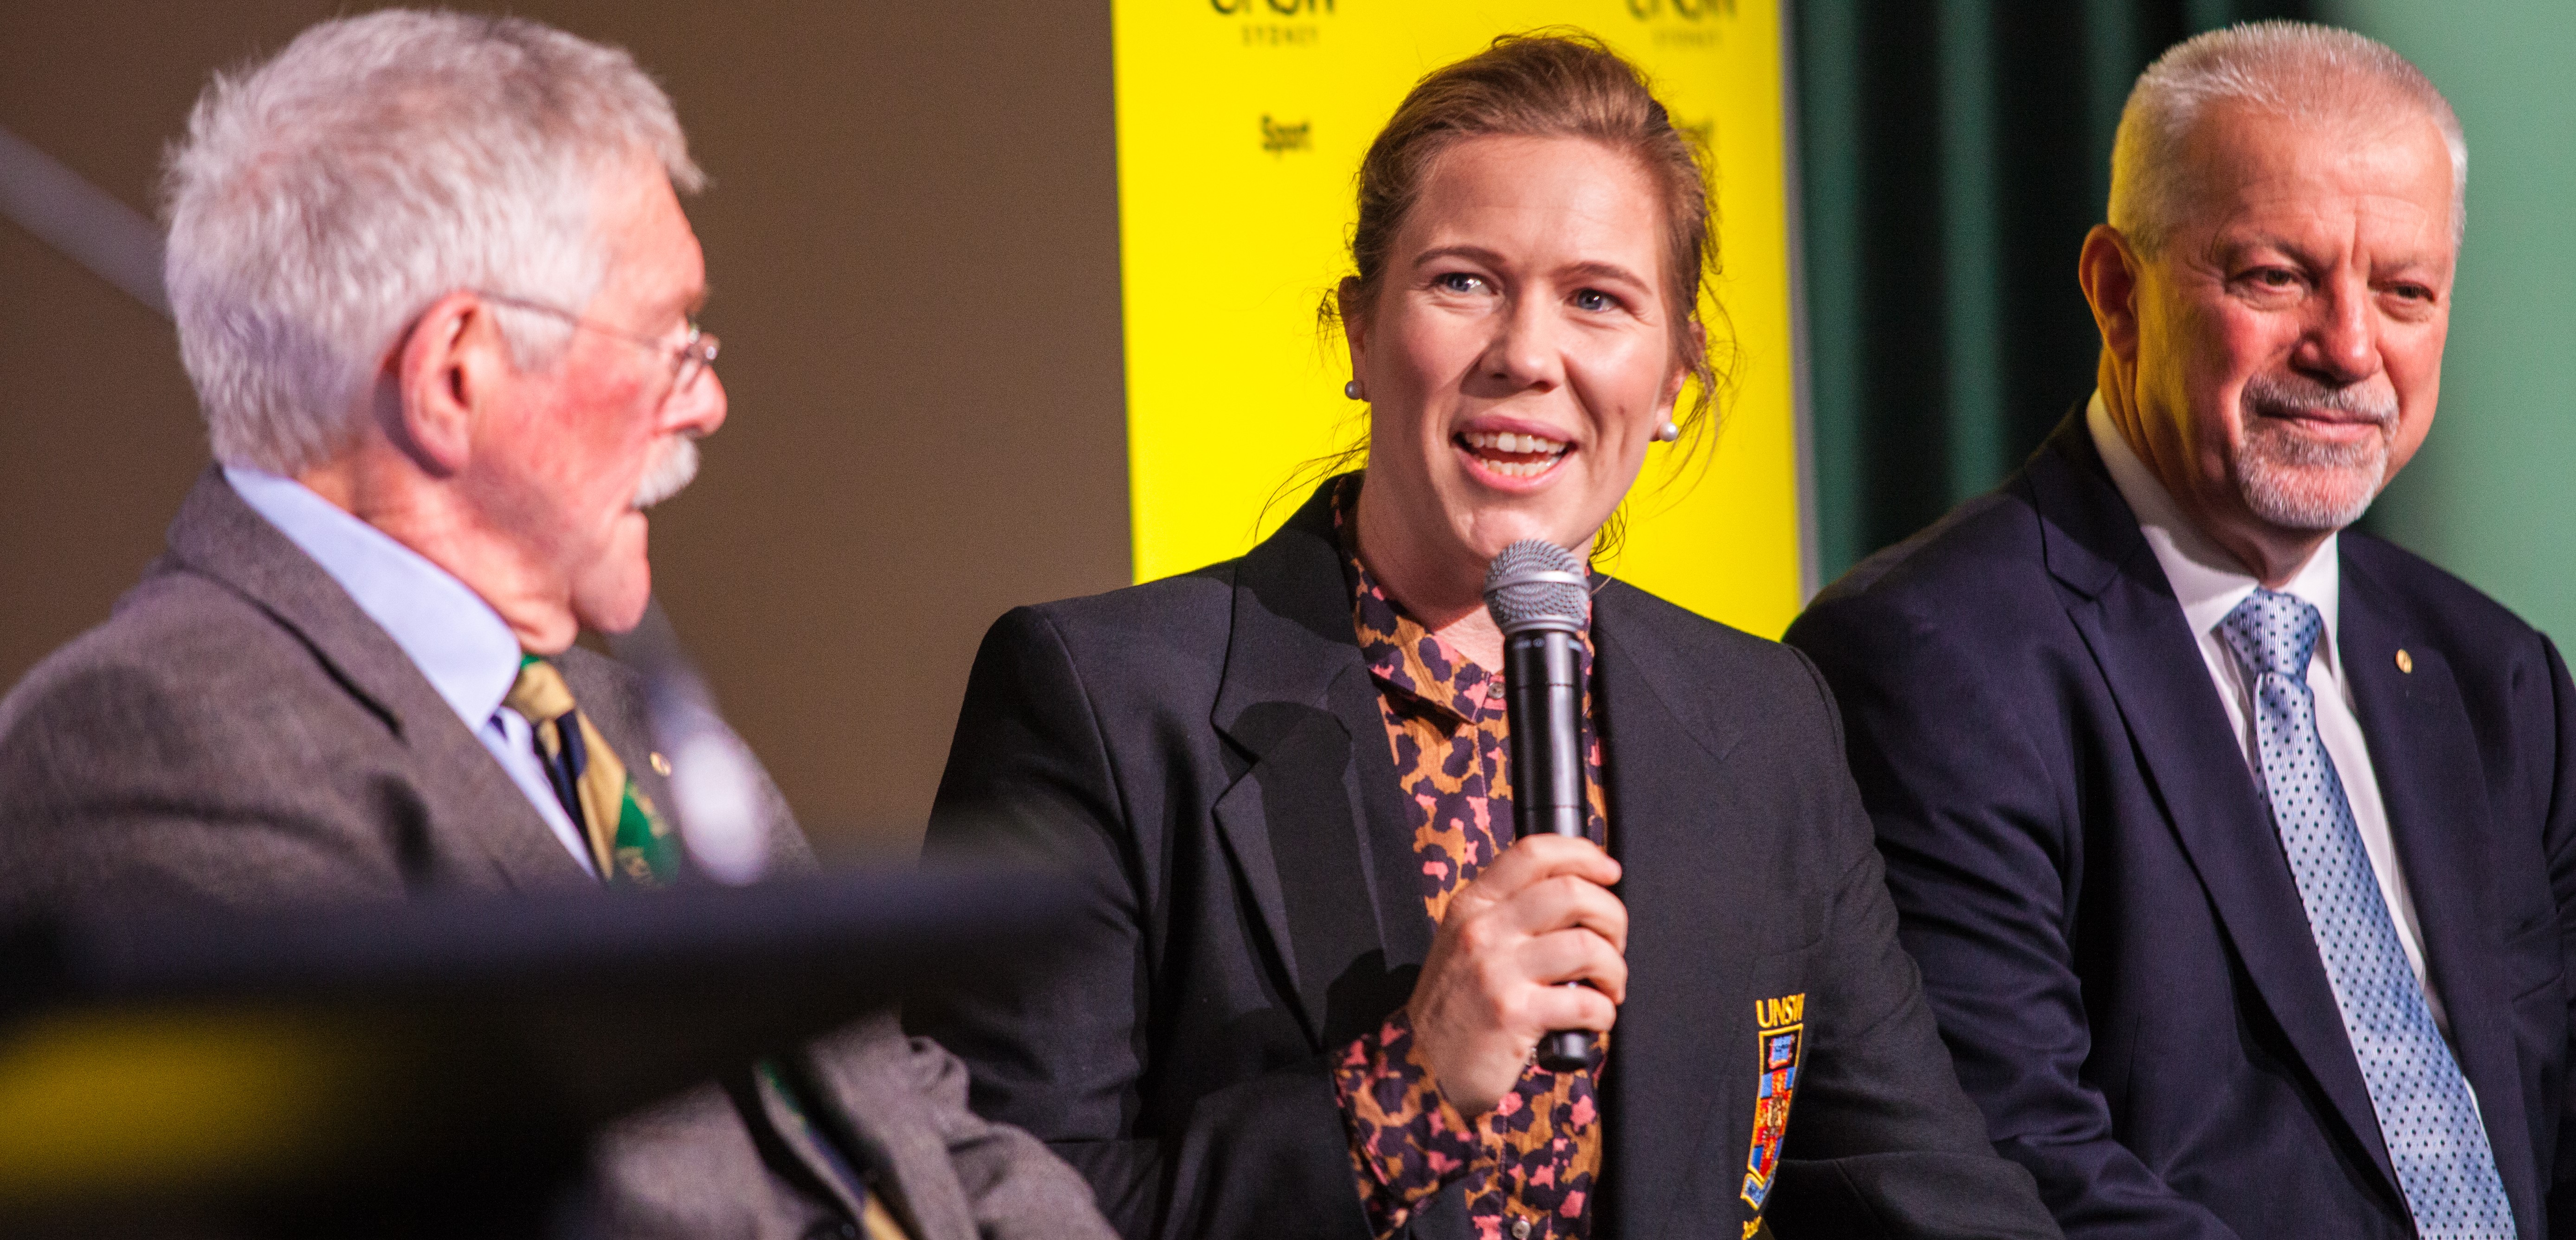 Alex Blackwell at the UNSW Sports Hall of Fame event